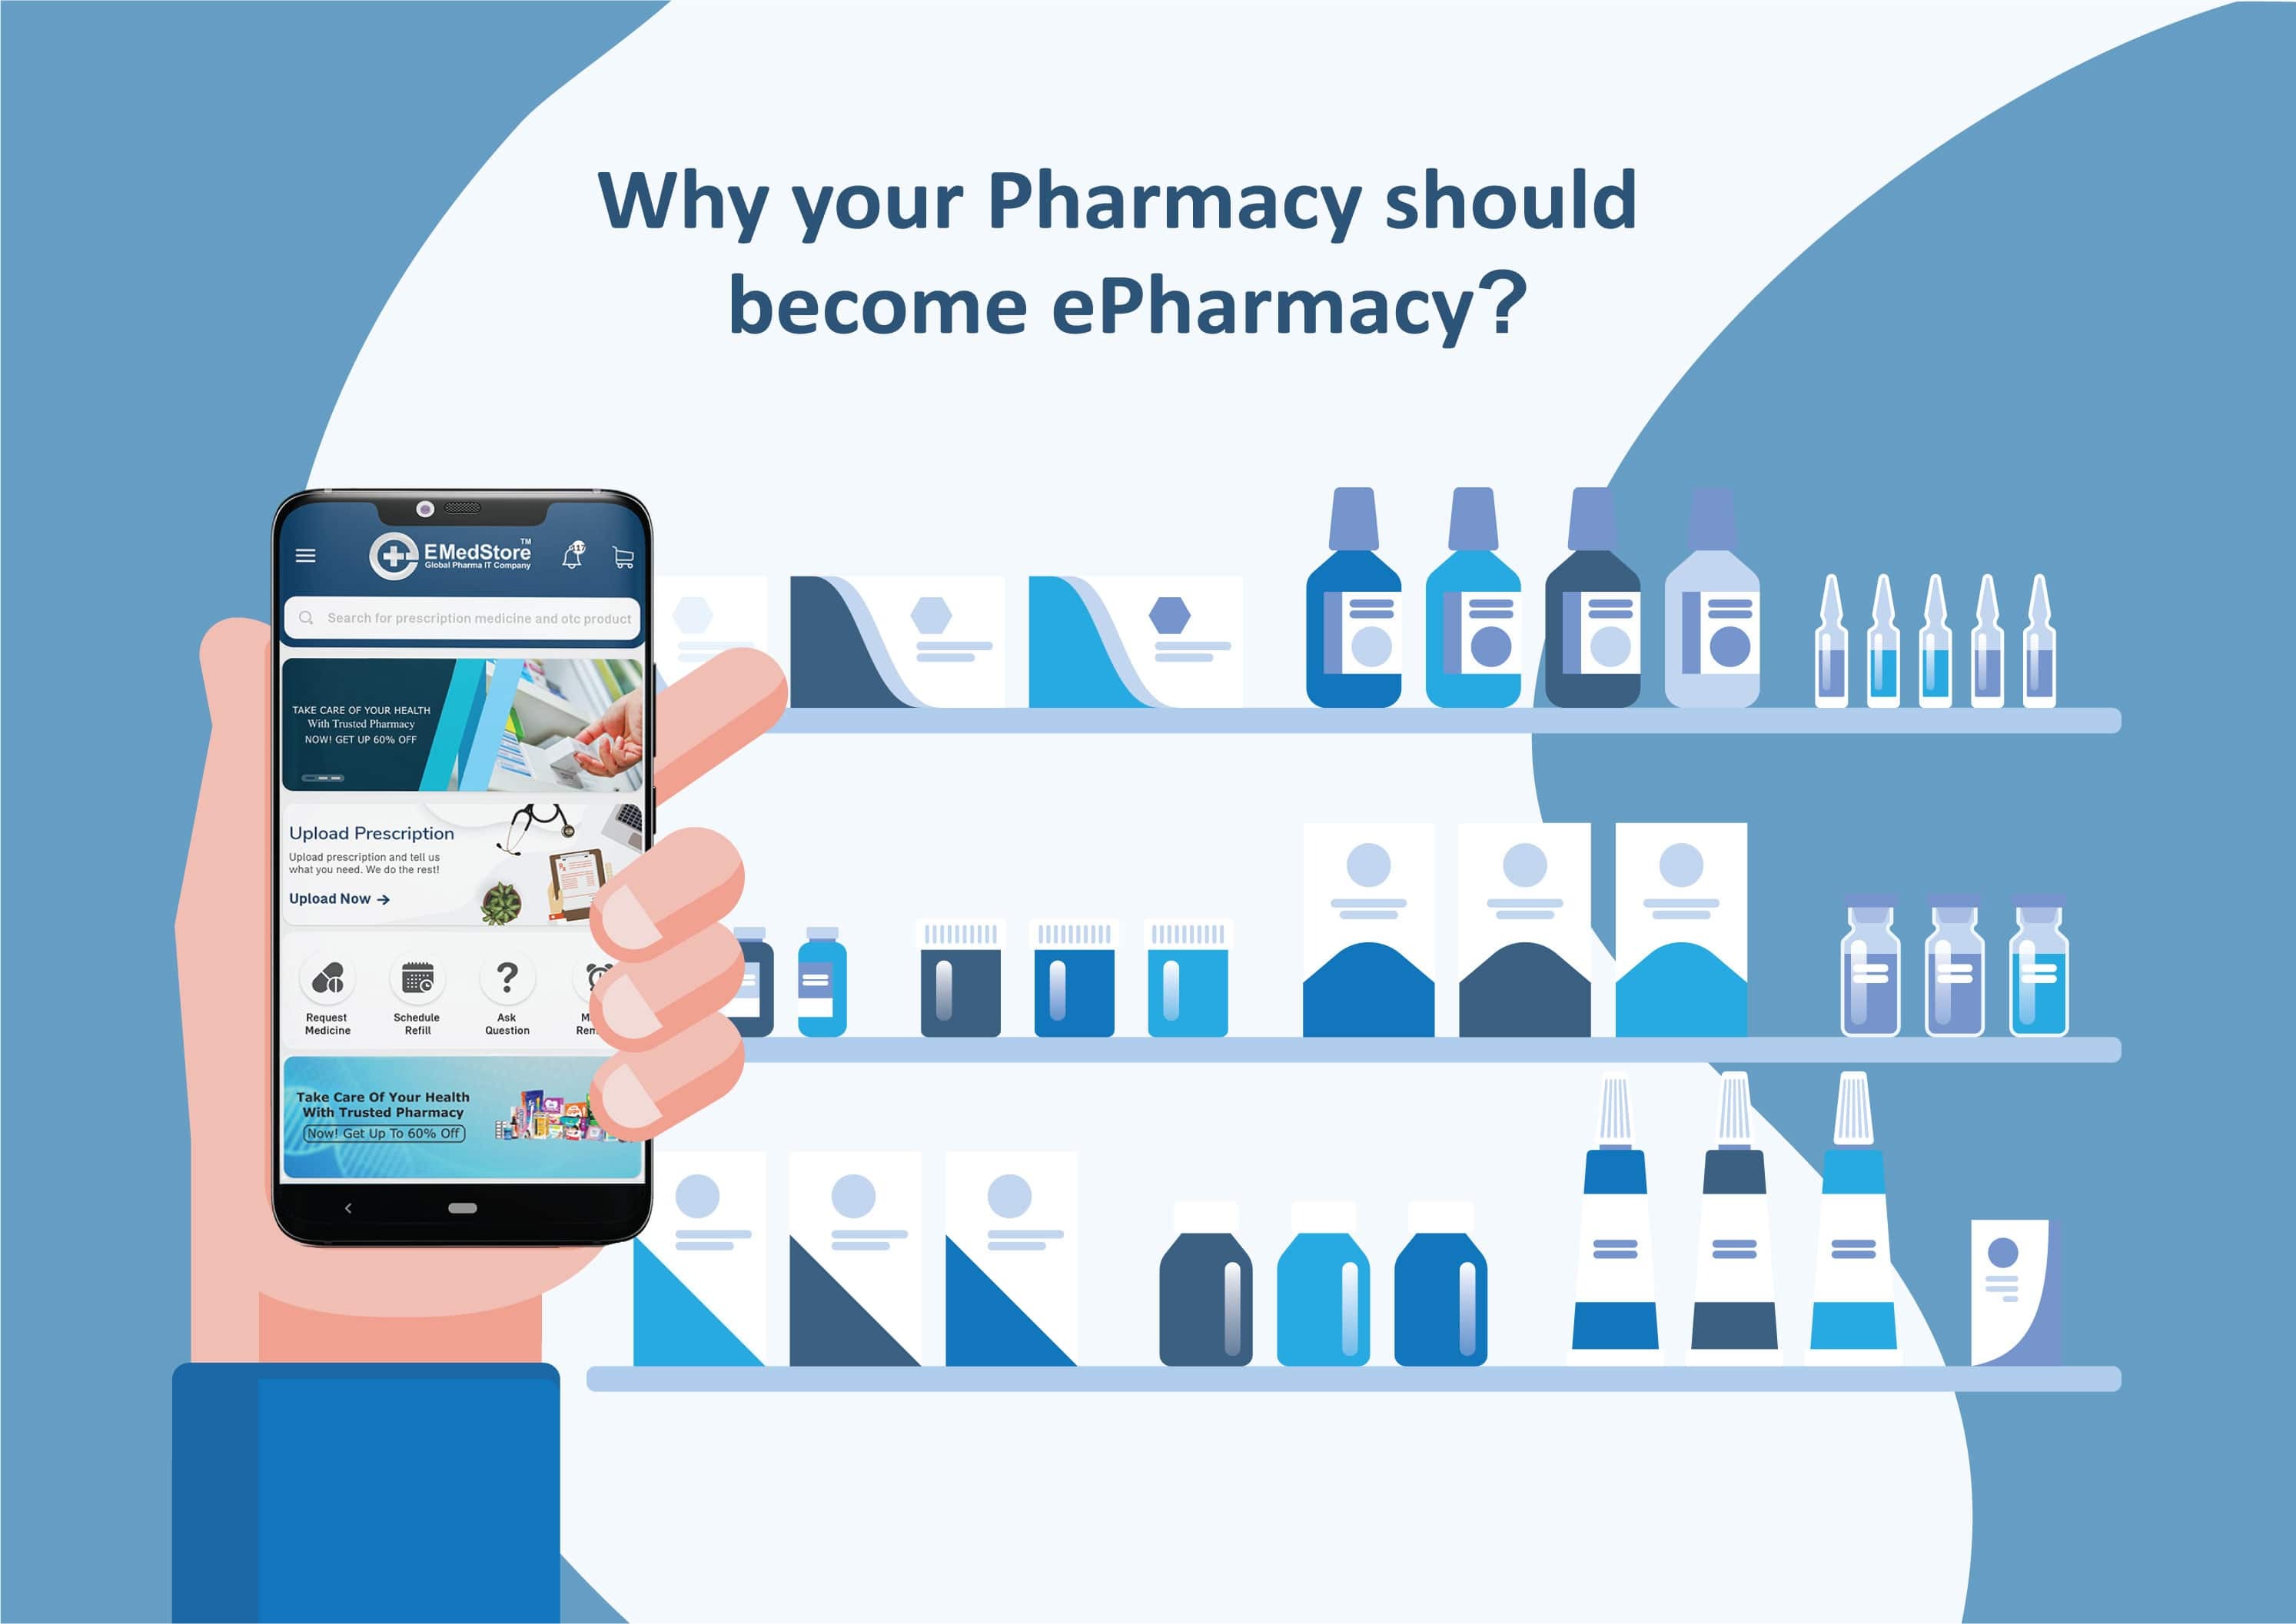 why your pharmacy should become epharmacy?